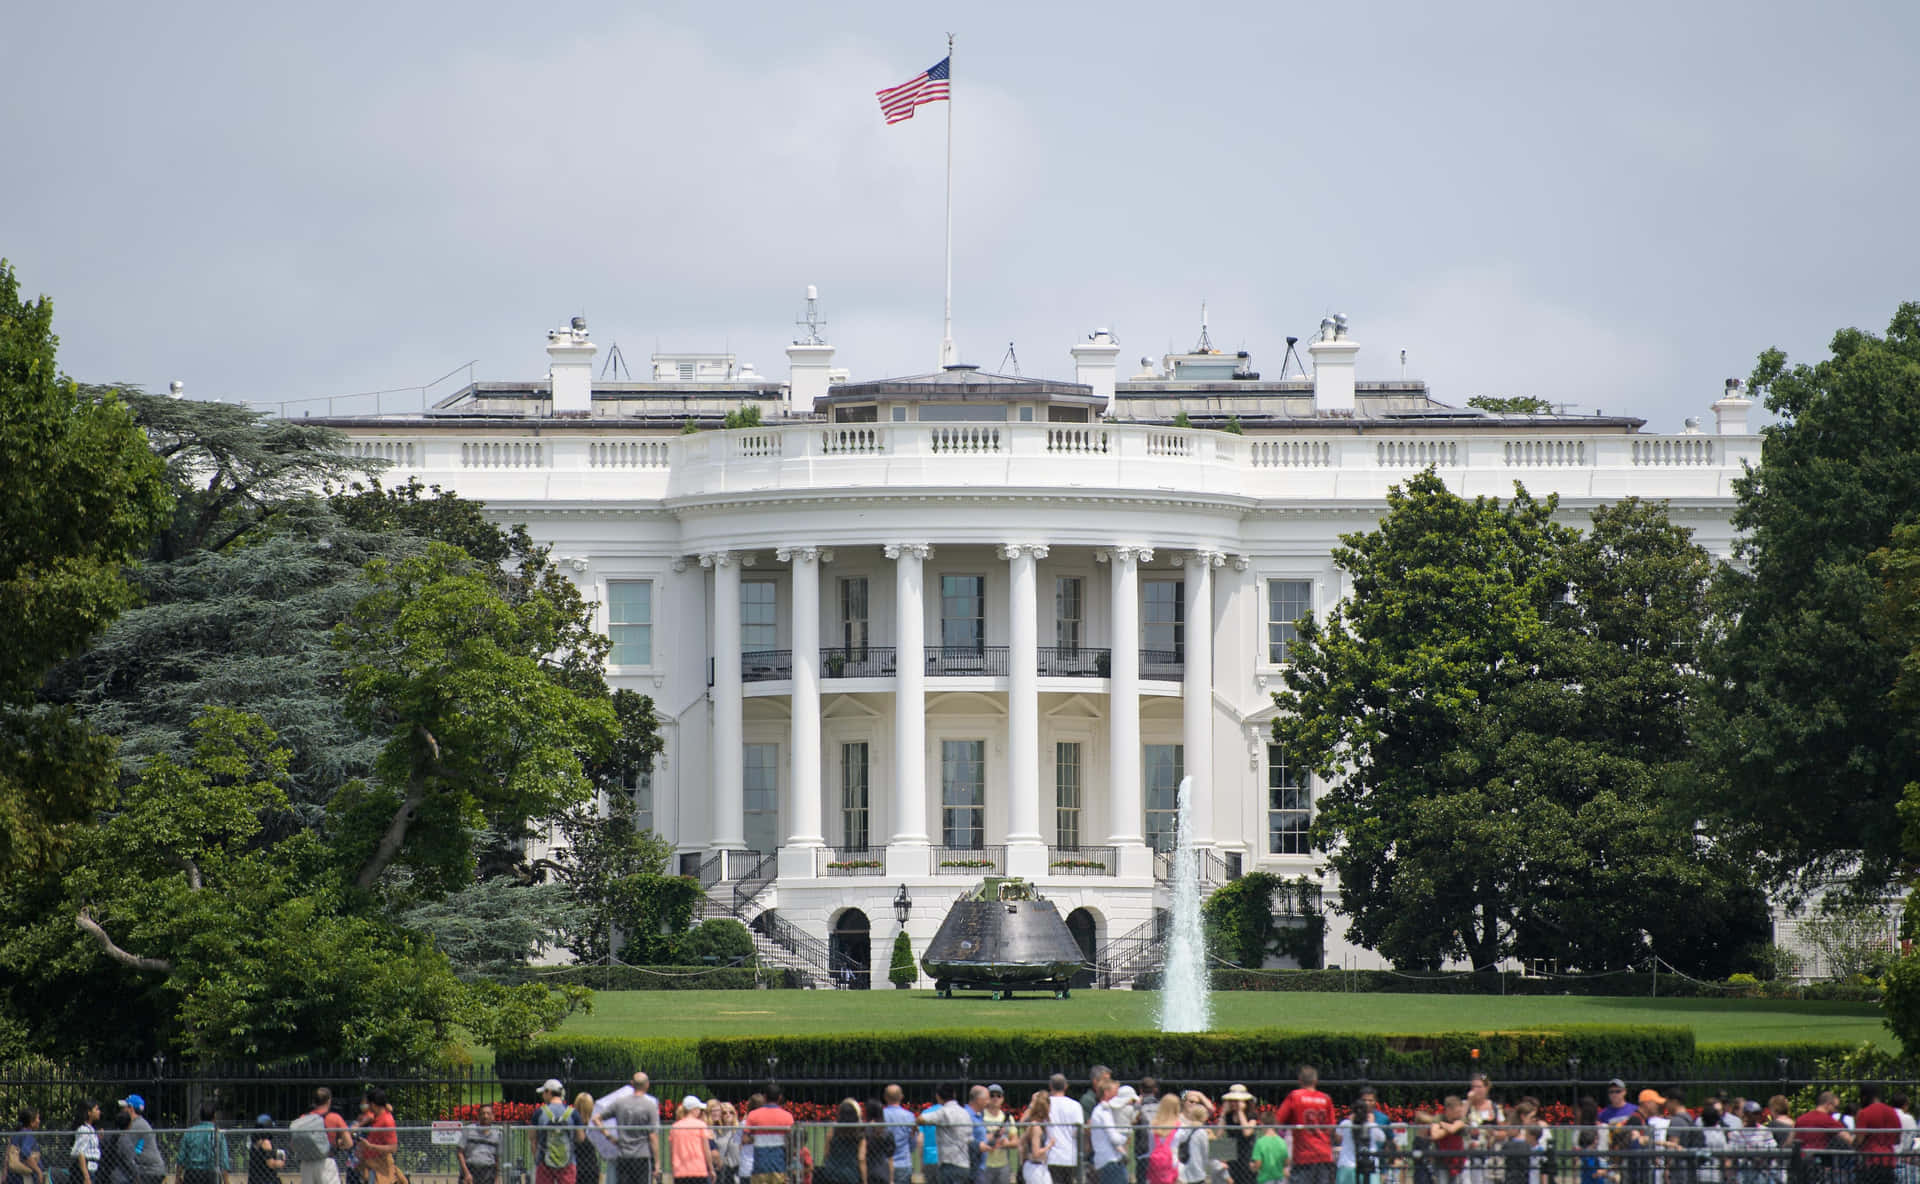 The White House in Washington D.C., a symbol of American democracy and presidential leadership